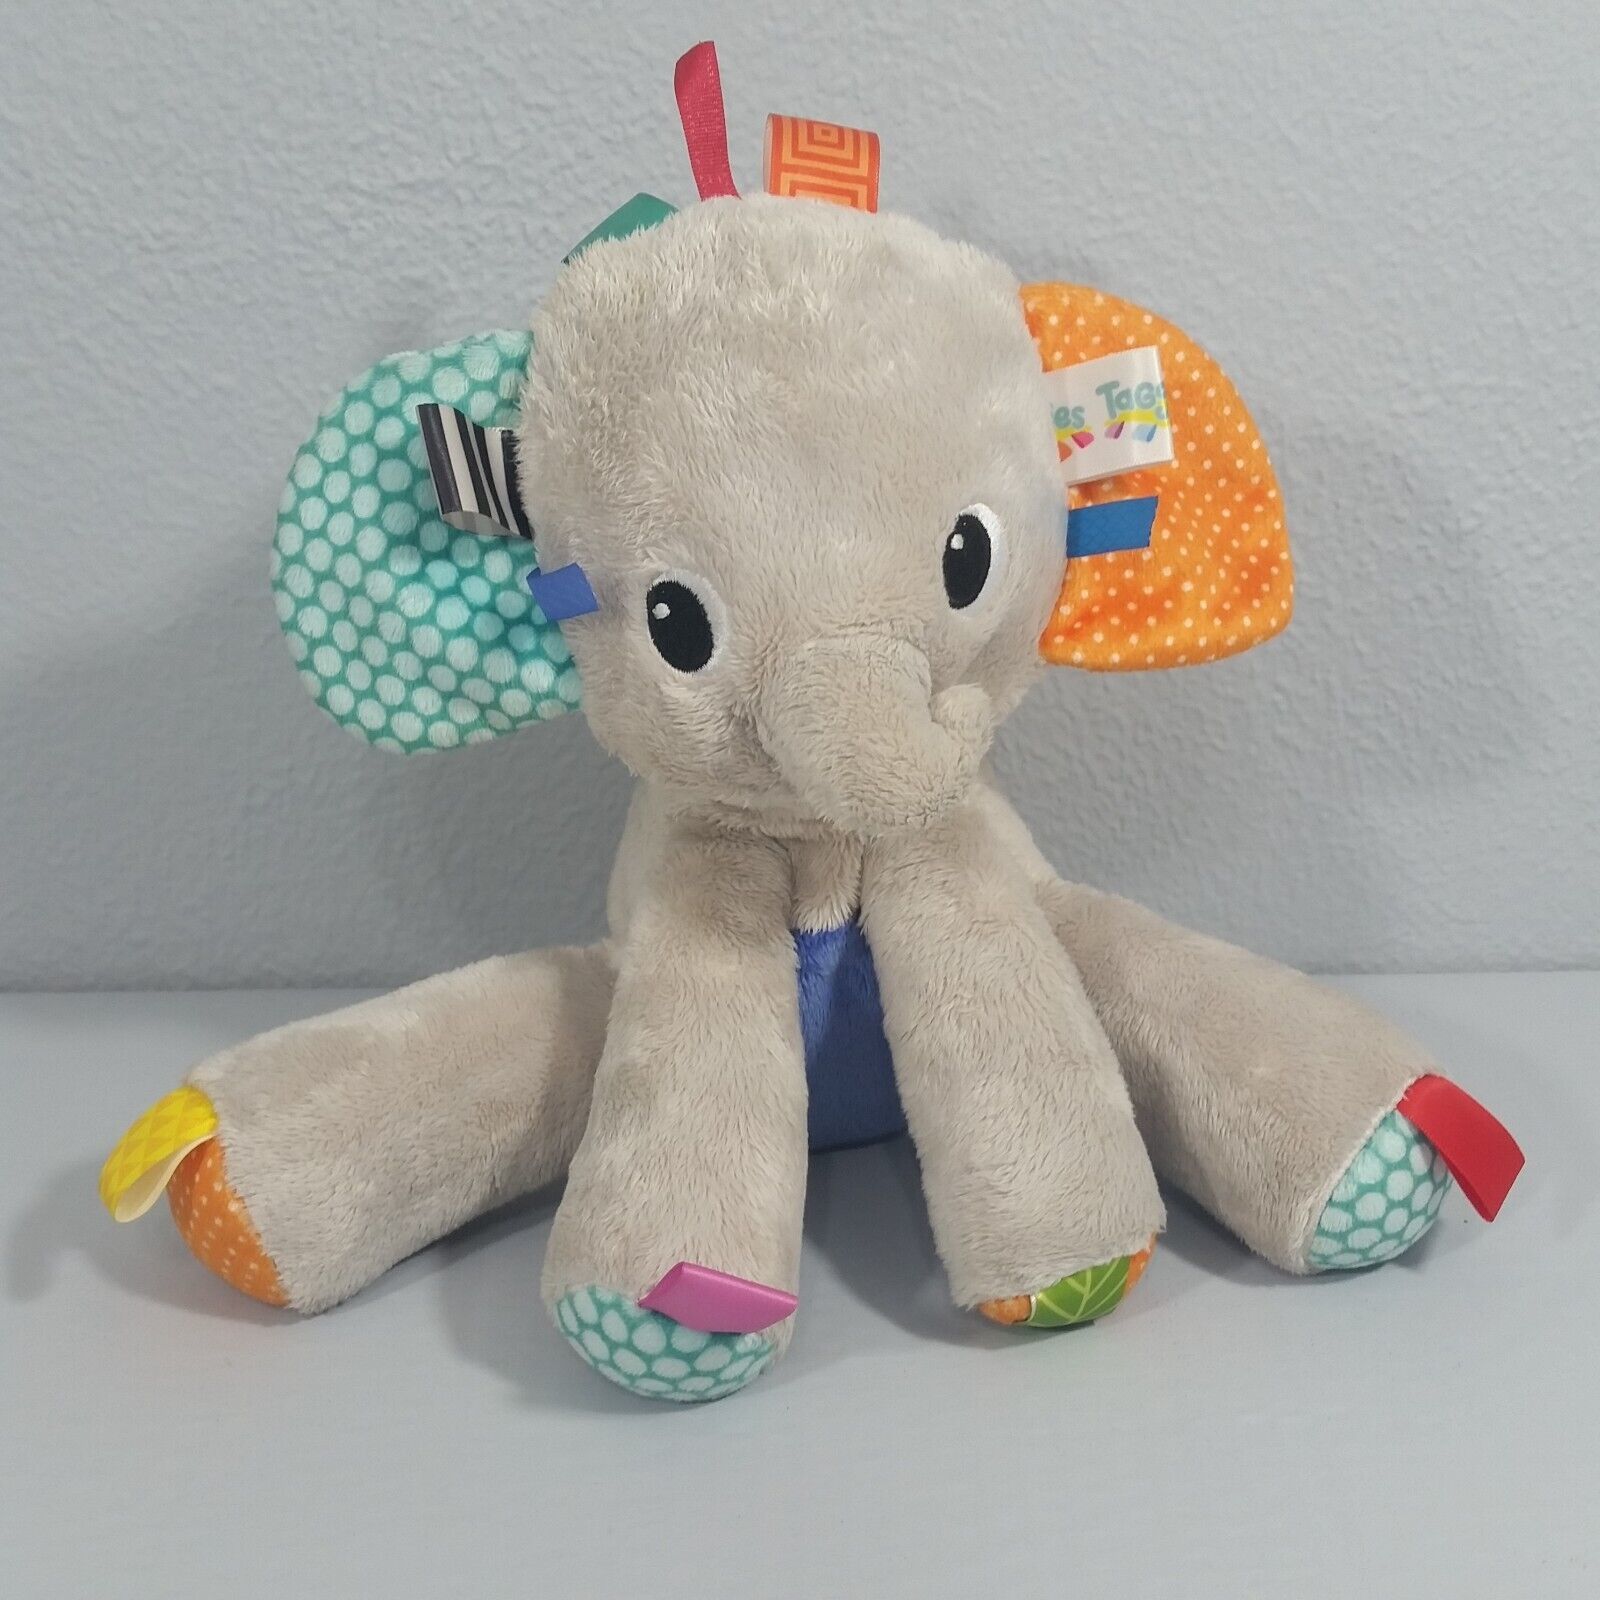 Primary image for Bright Starts Taggies Elephant 8 inch Plush Tag N Play Pal Baby Security Rattle